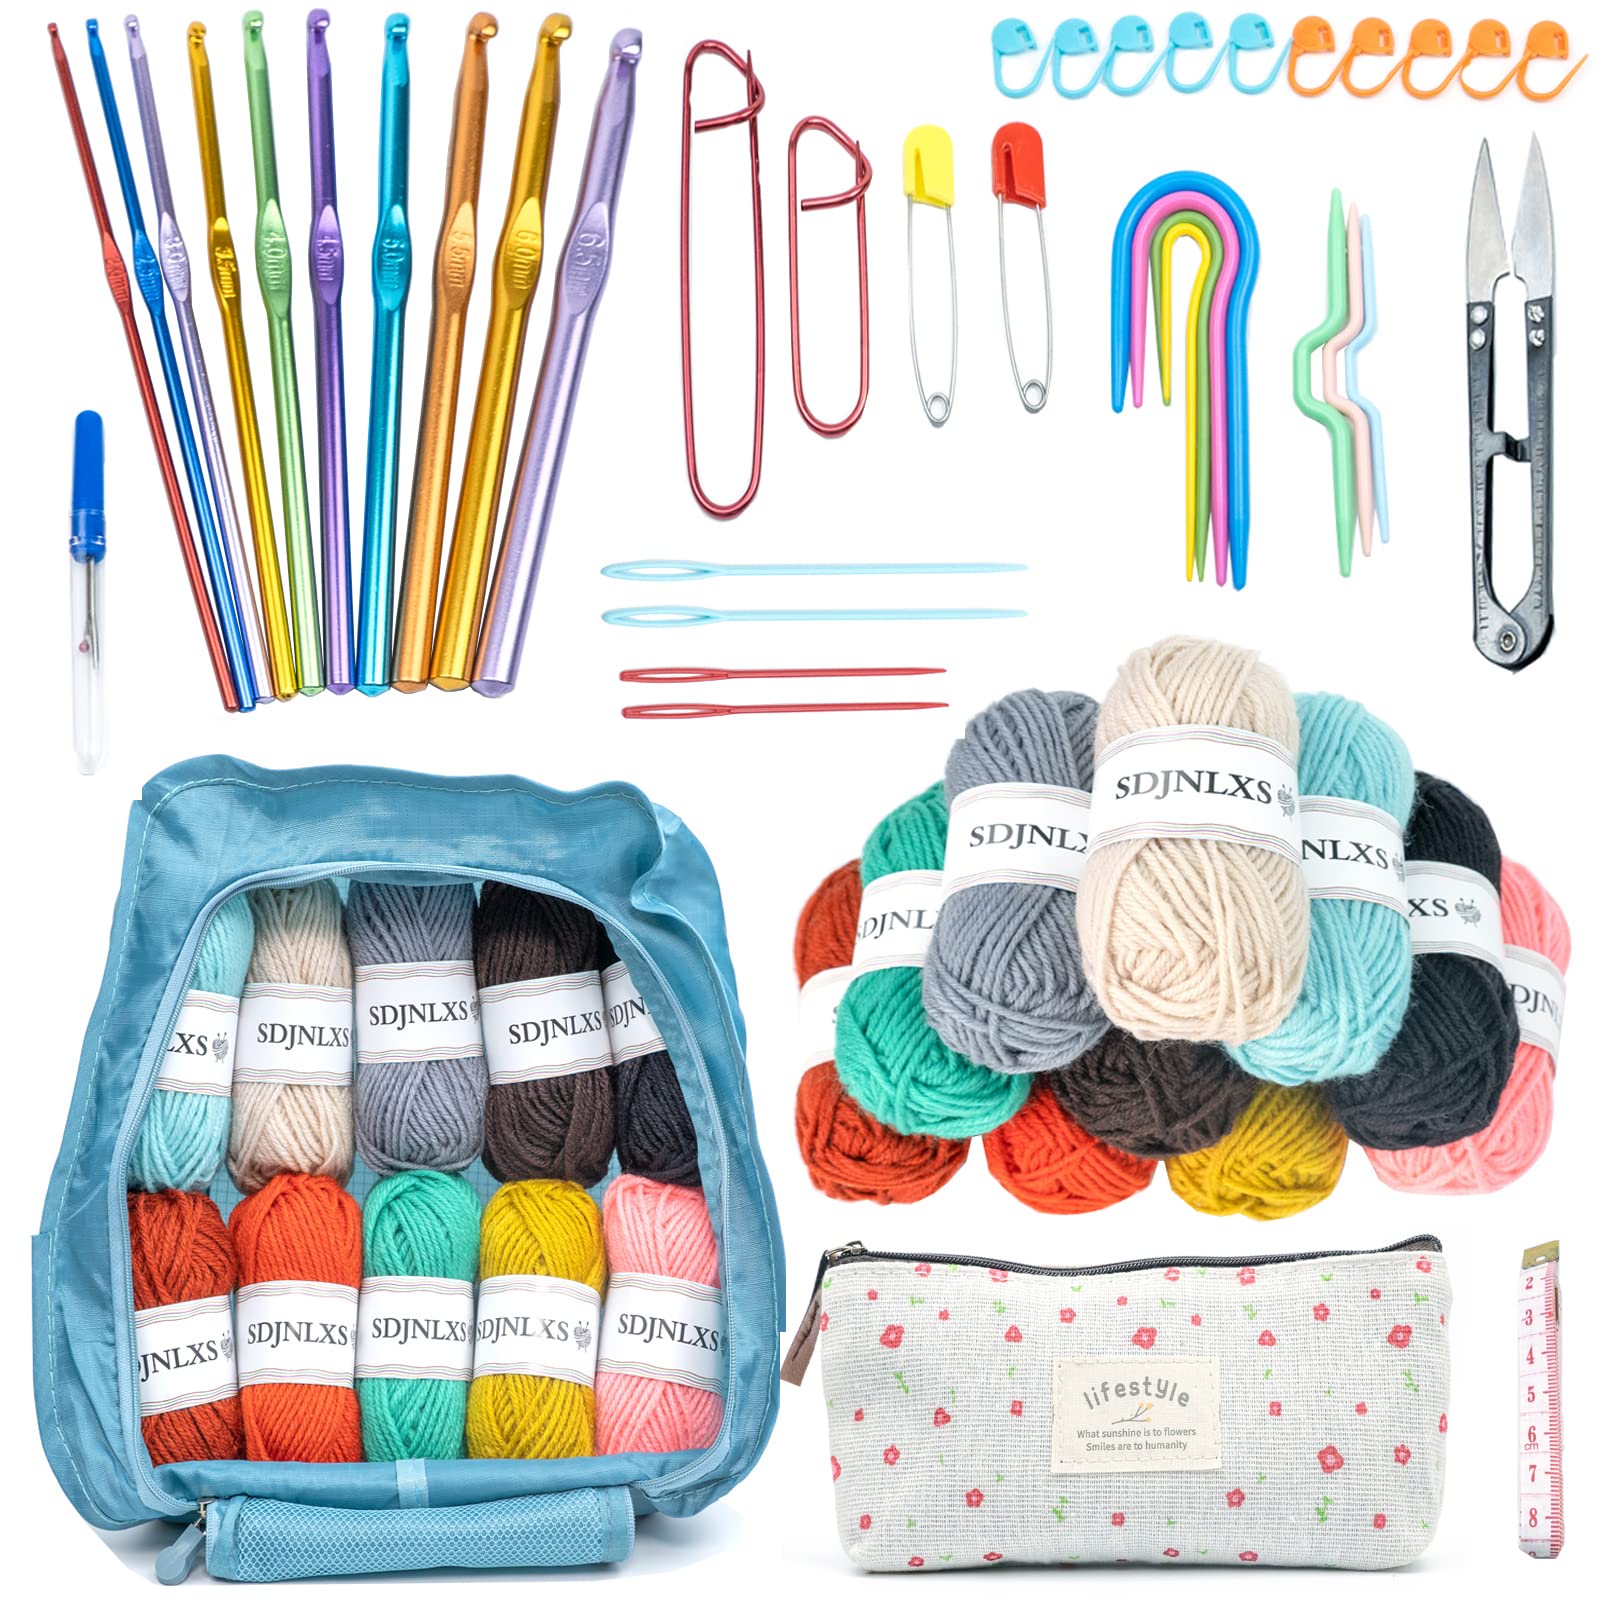 SDJNLXS 50 Piece Crochet Kit for Beginners Crochet Kit with Yarn Set,10  Colors Crochet Yarn,Crochet Hooks,Stitch Markers,Crochet Bag etc,Used to  Relieve Stres Crochet Starter Kit